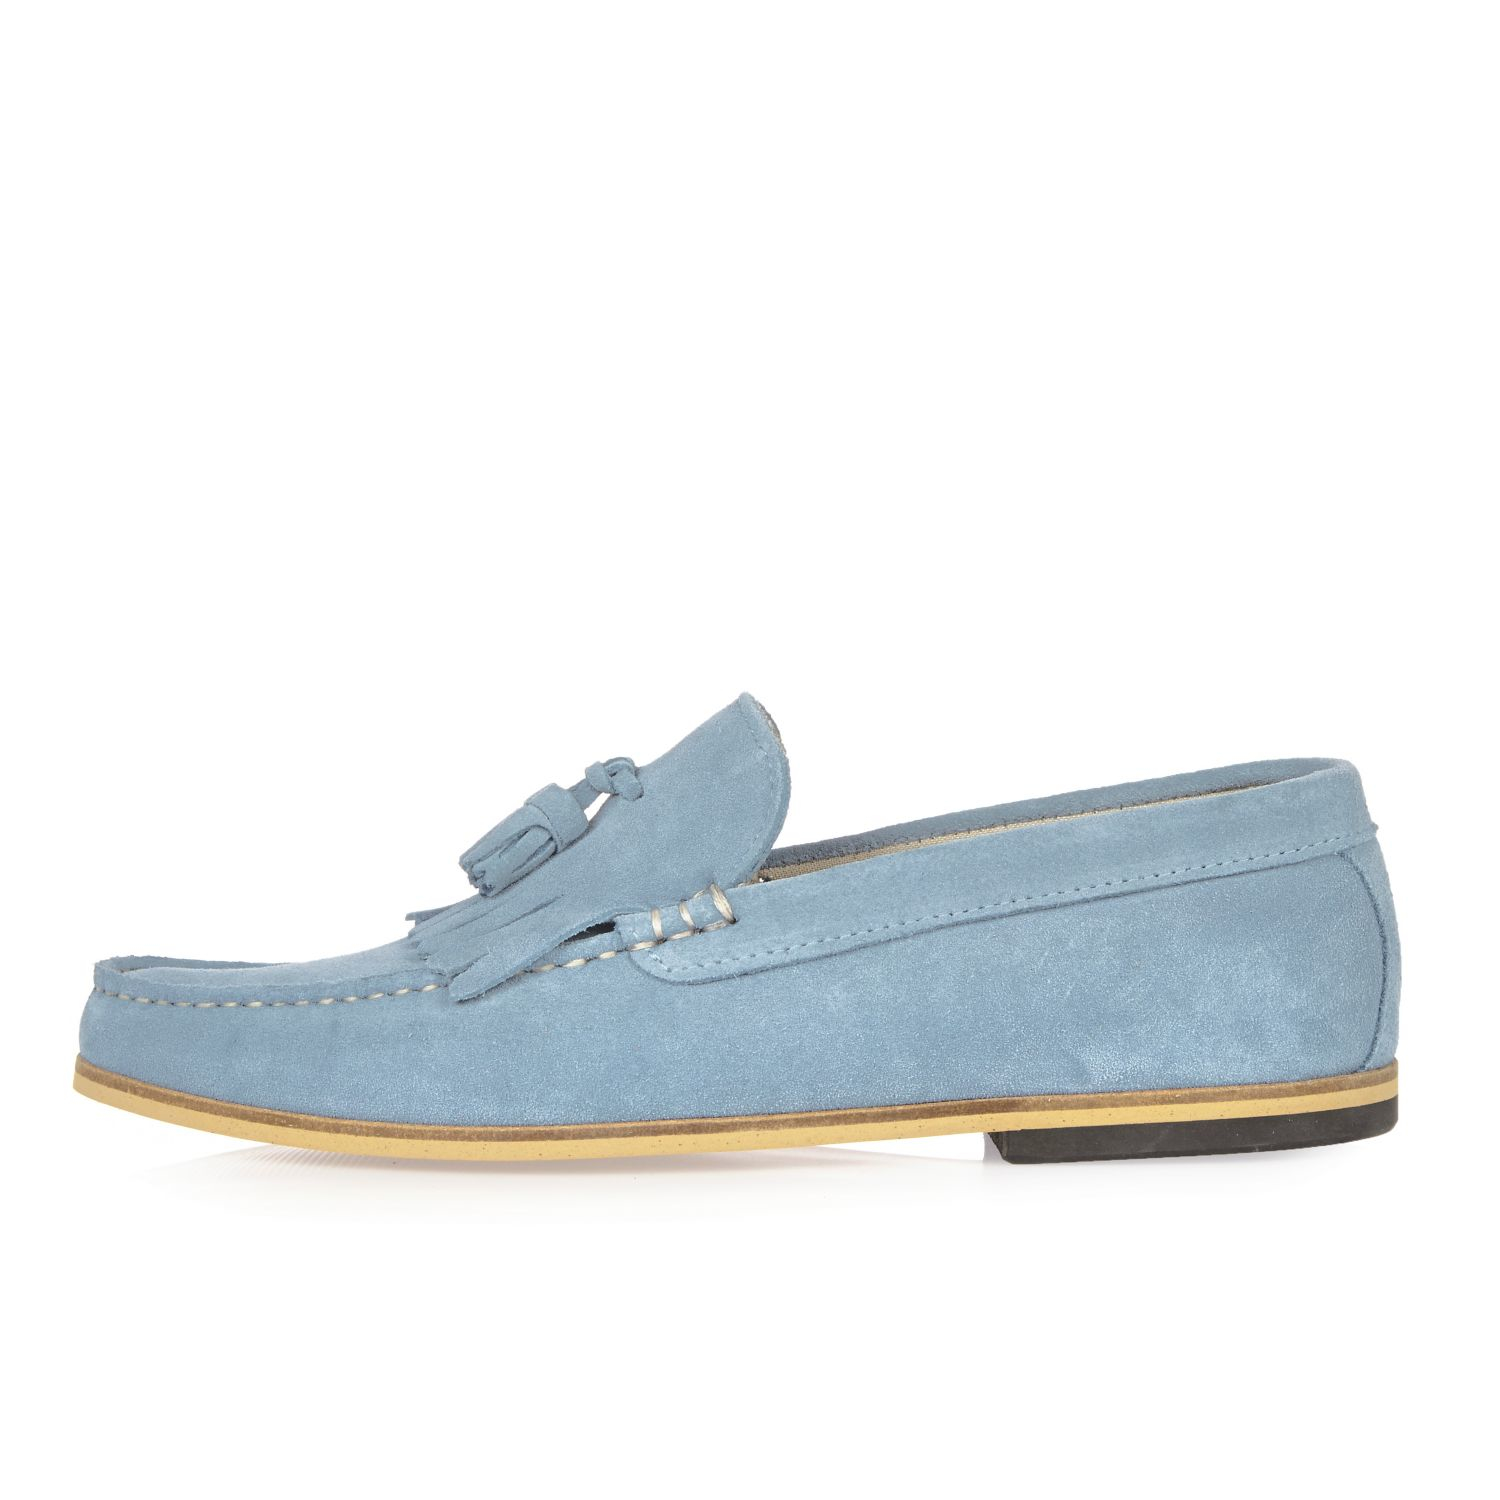 light blue loafers